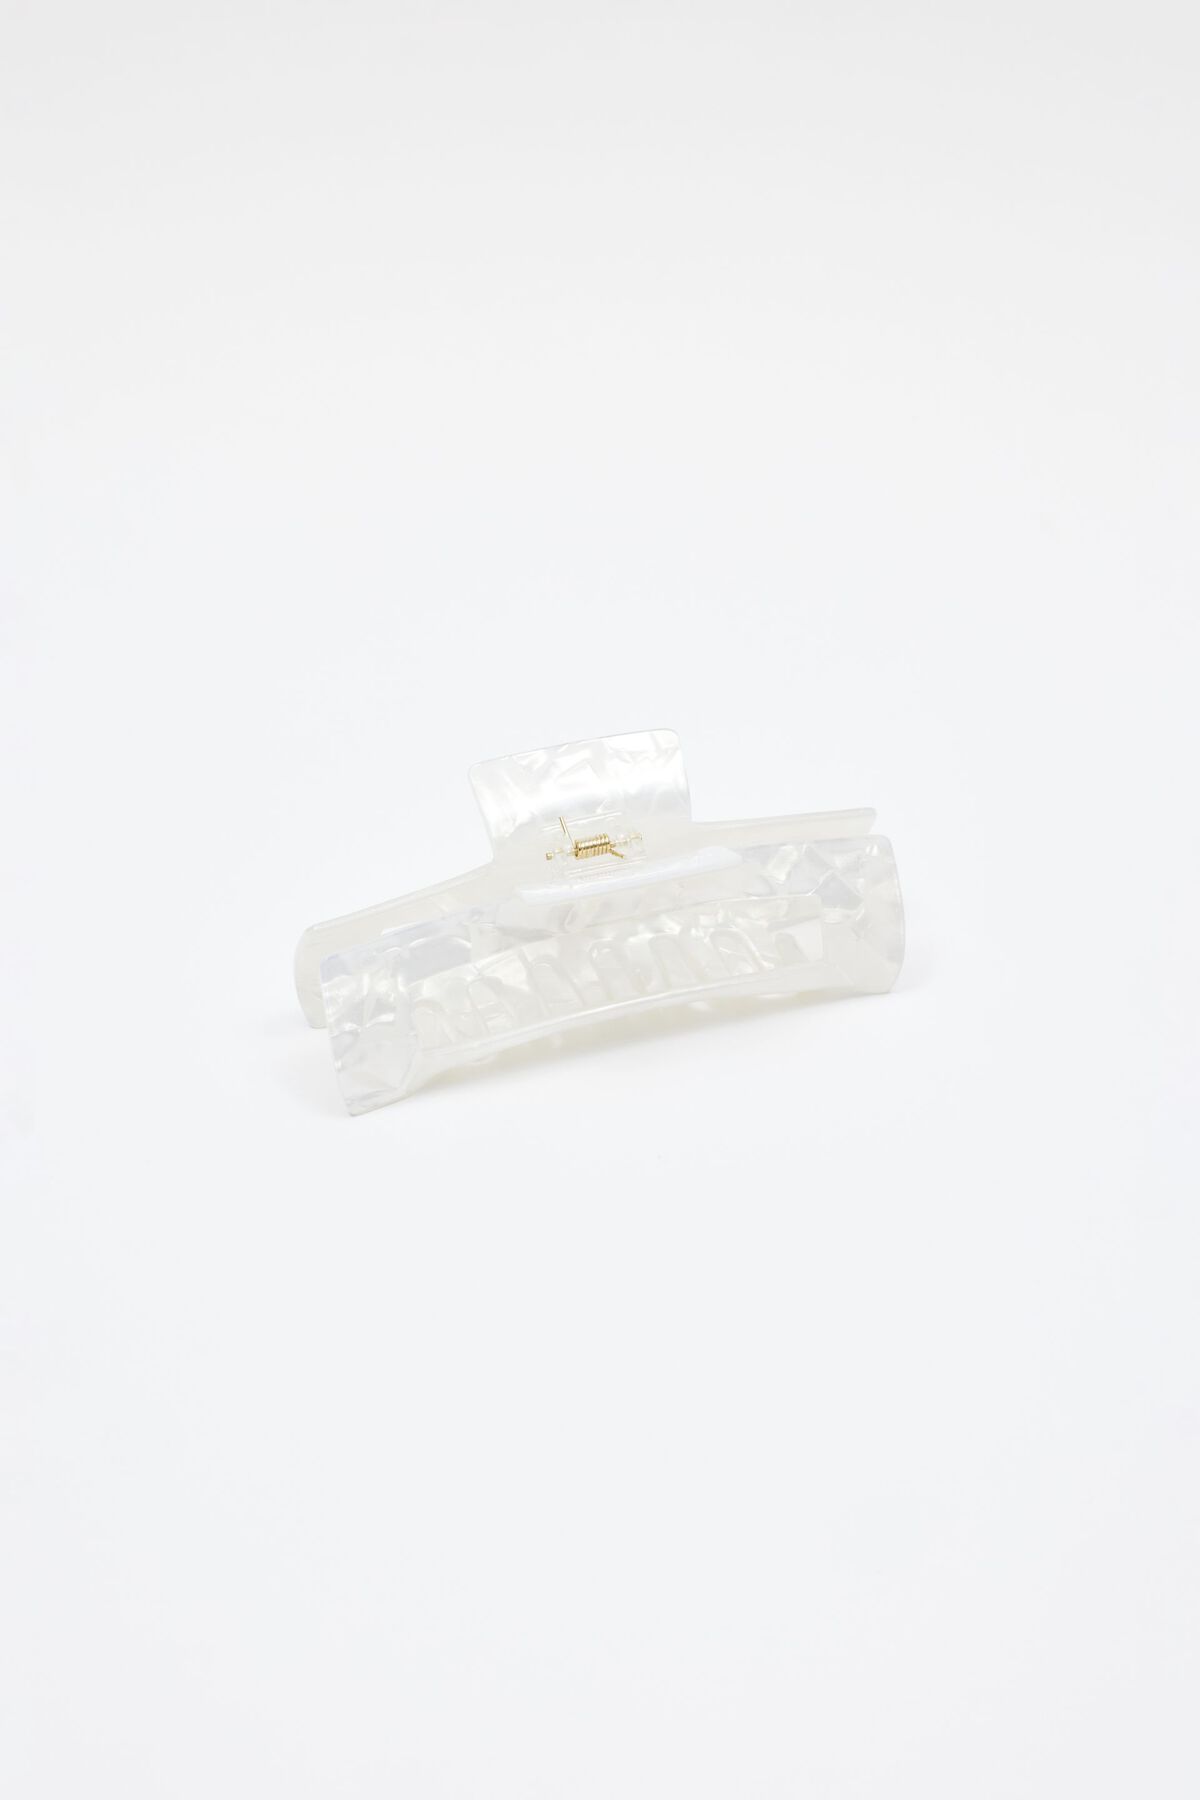 Dynamite Super Sized Rectangle Claw Hair Clip. 2